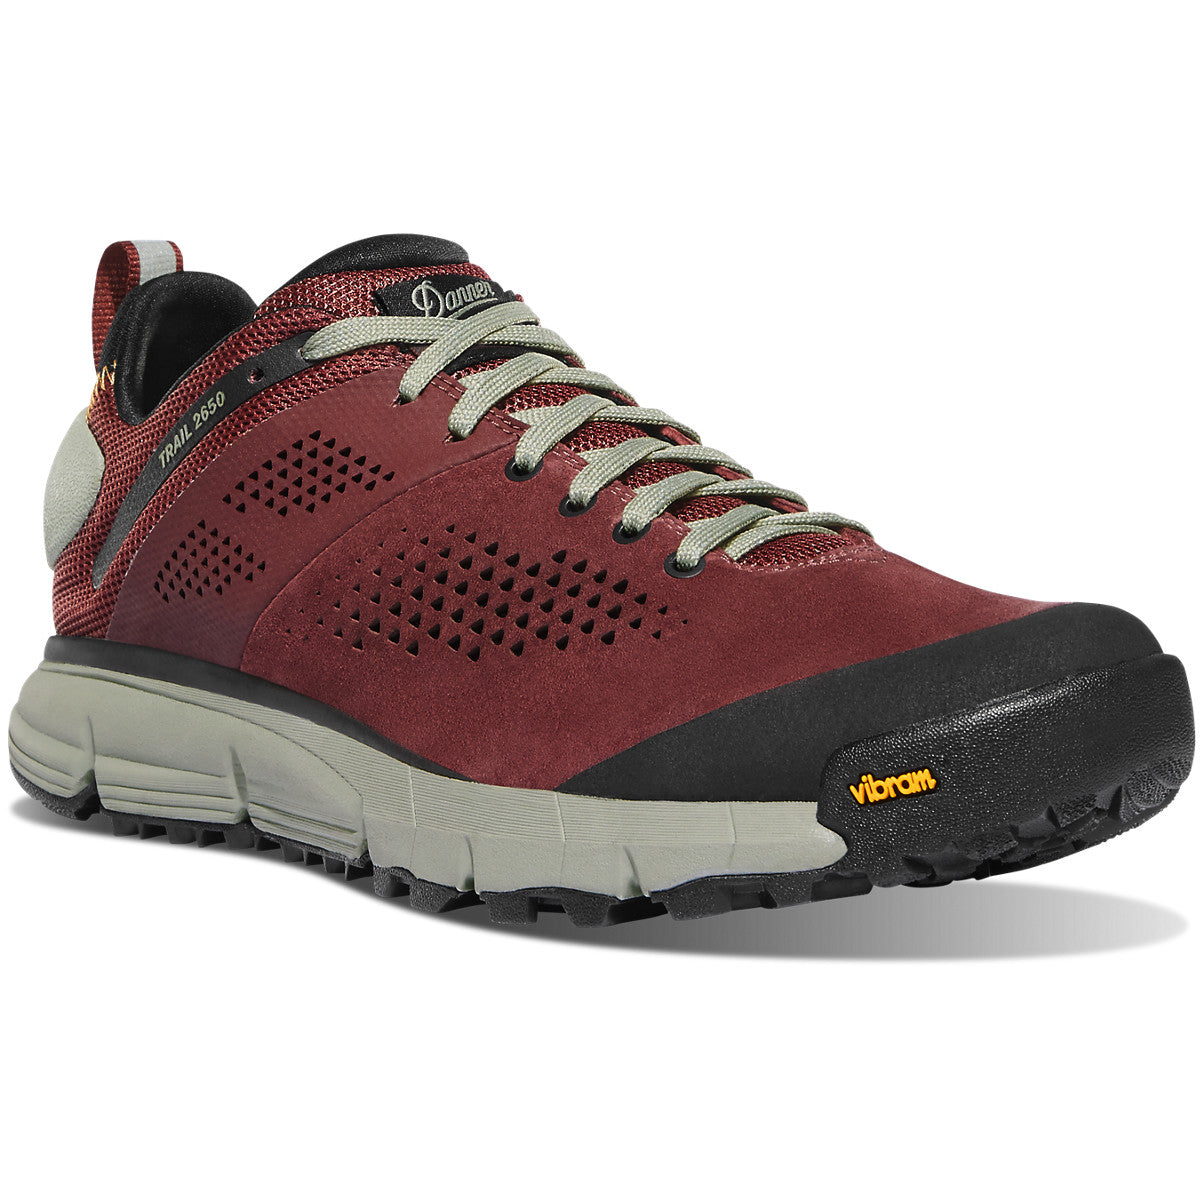 Danner Men's Trail 2650 3" Hiking Shoe in Brick Red from the side